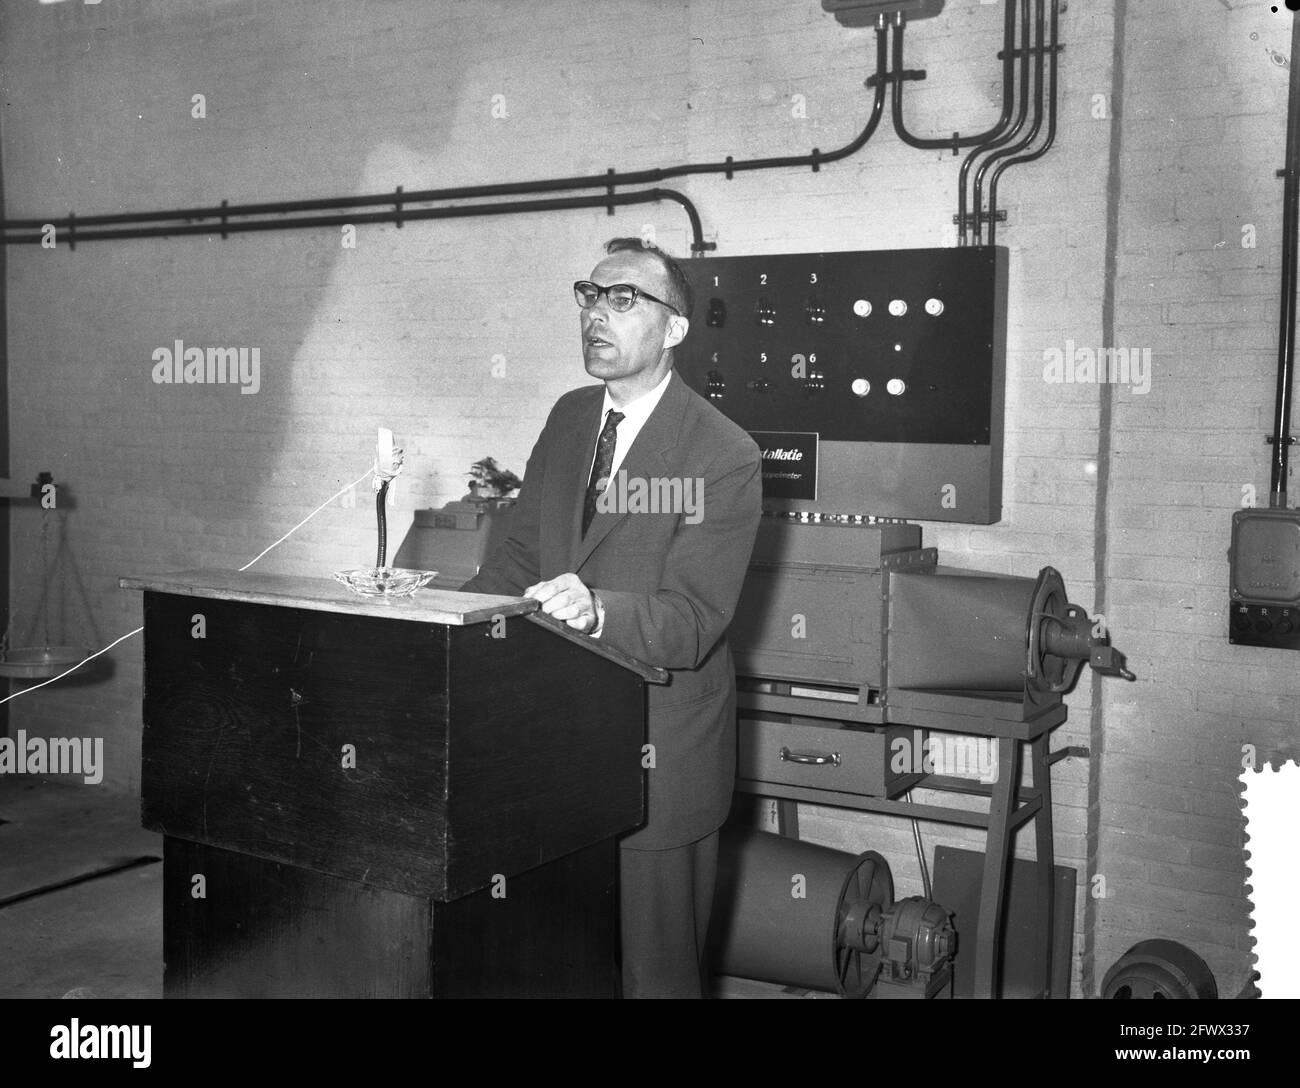 Assignments to the Kiekens Machine Factory at Landsmeer, June 14, 1960, Assignments, The Netherlands, 20th century press agency photo, news to remember, documentary, historic photography 1945-1990, visual stories, human history of the Twentieth Century, capturing moments in time Stock Photo